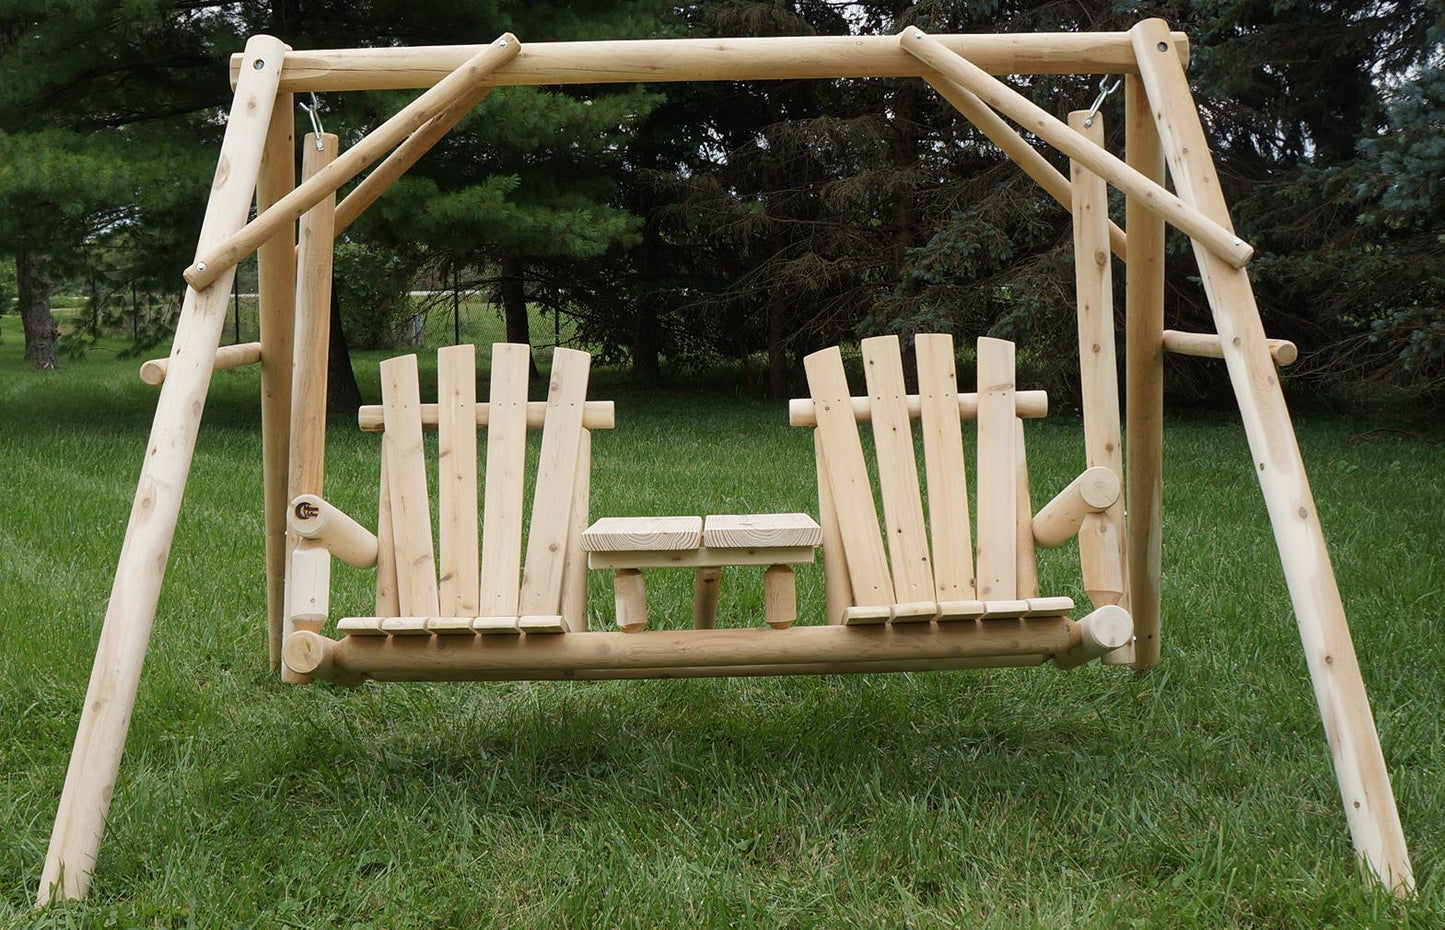 Moon Valley Rustic Tete-a-tete Lawn Swing  - LEAD TIME TO SHIP 2 WEEKS OR LESS